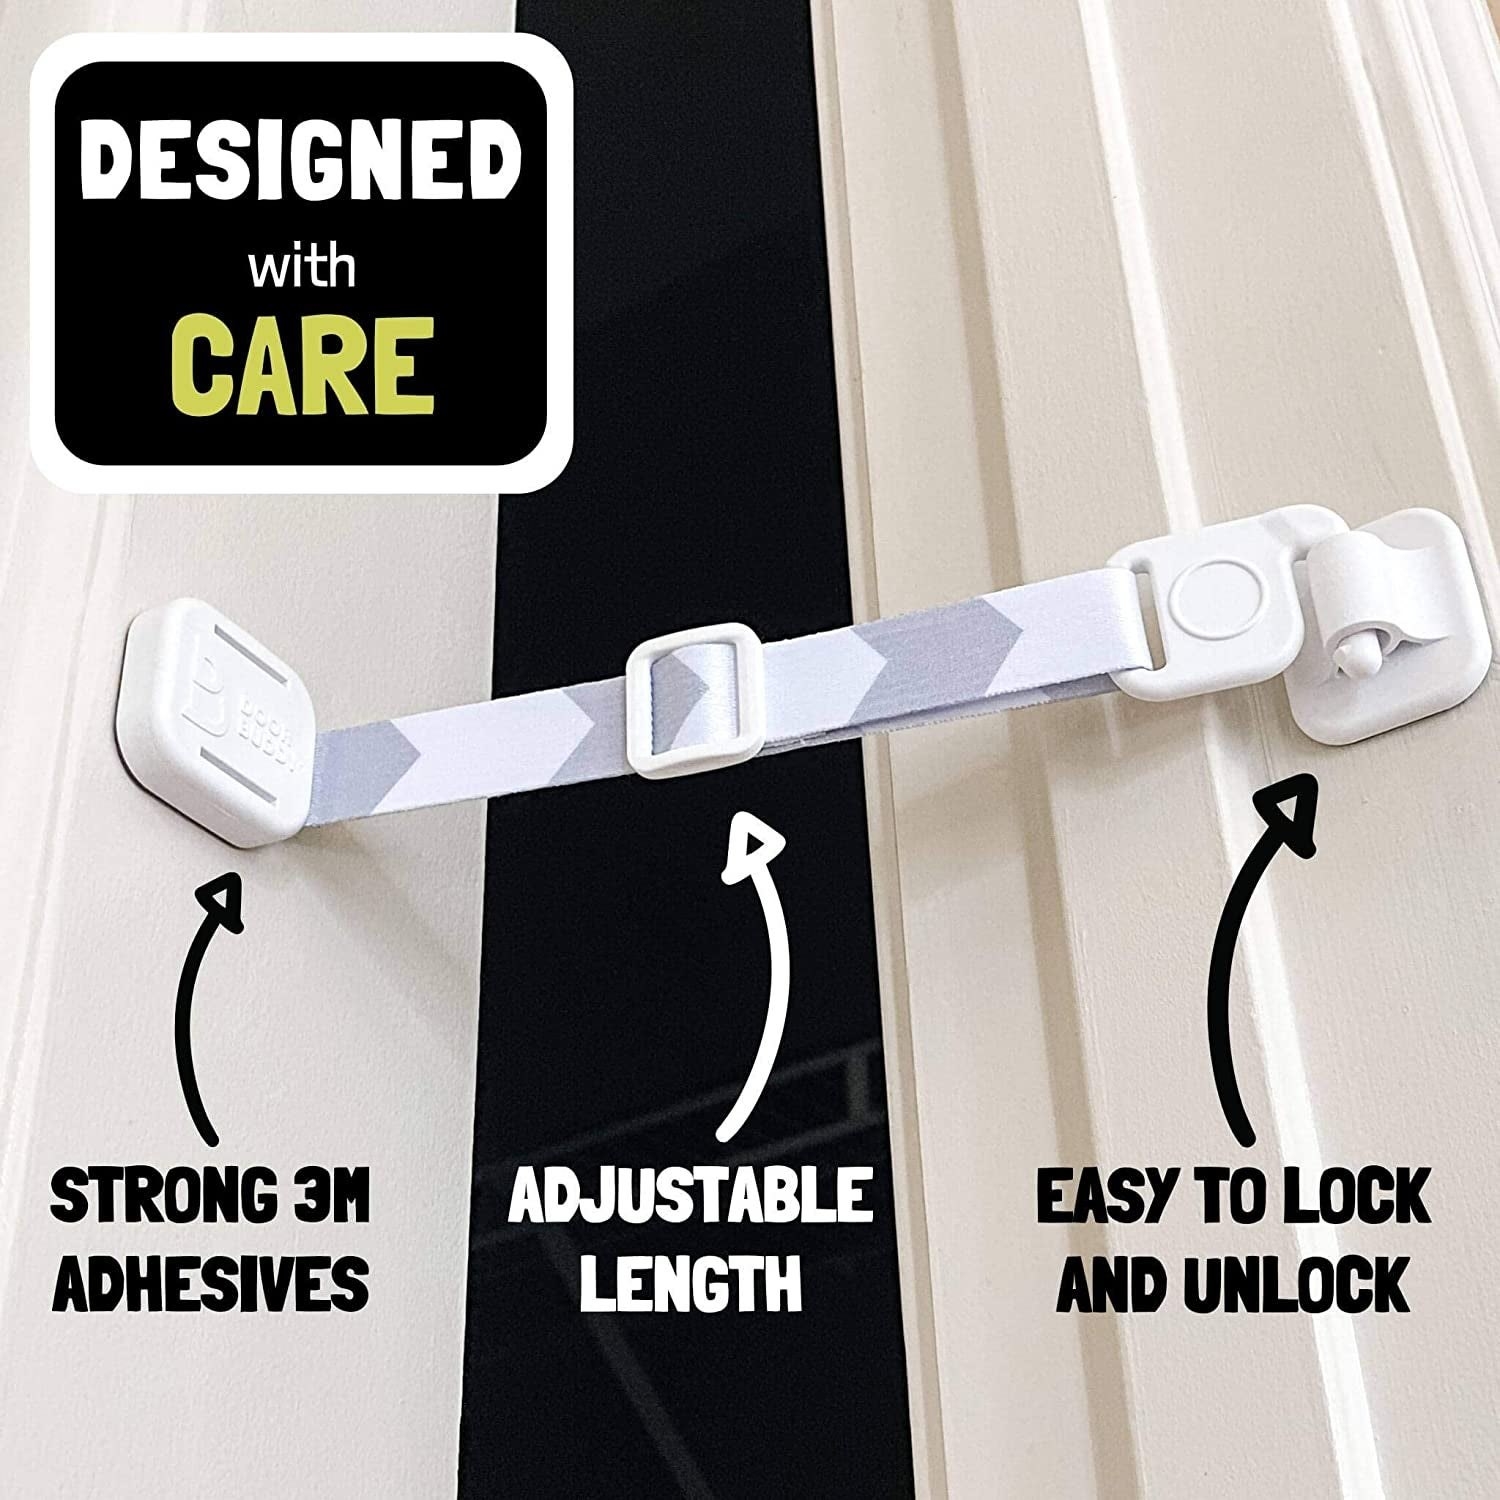 The door latch with text on the image that says &quot;strong 3M adhesives, adjustable length, easy to lock and unlock&quot;